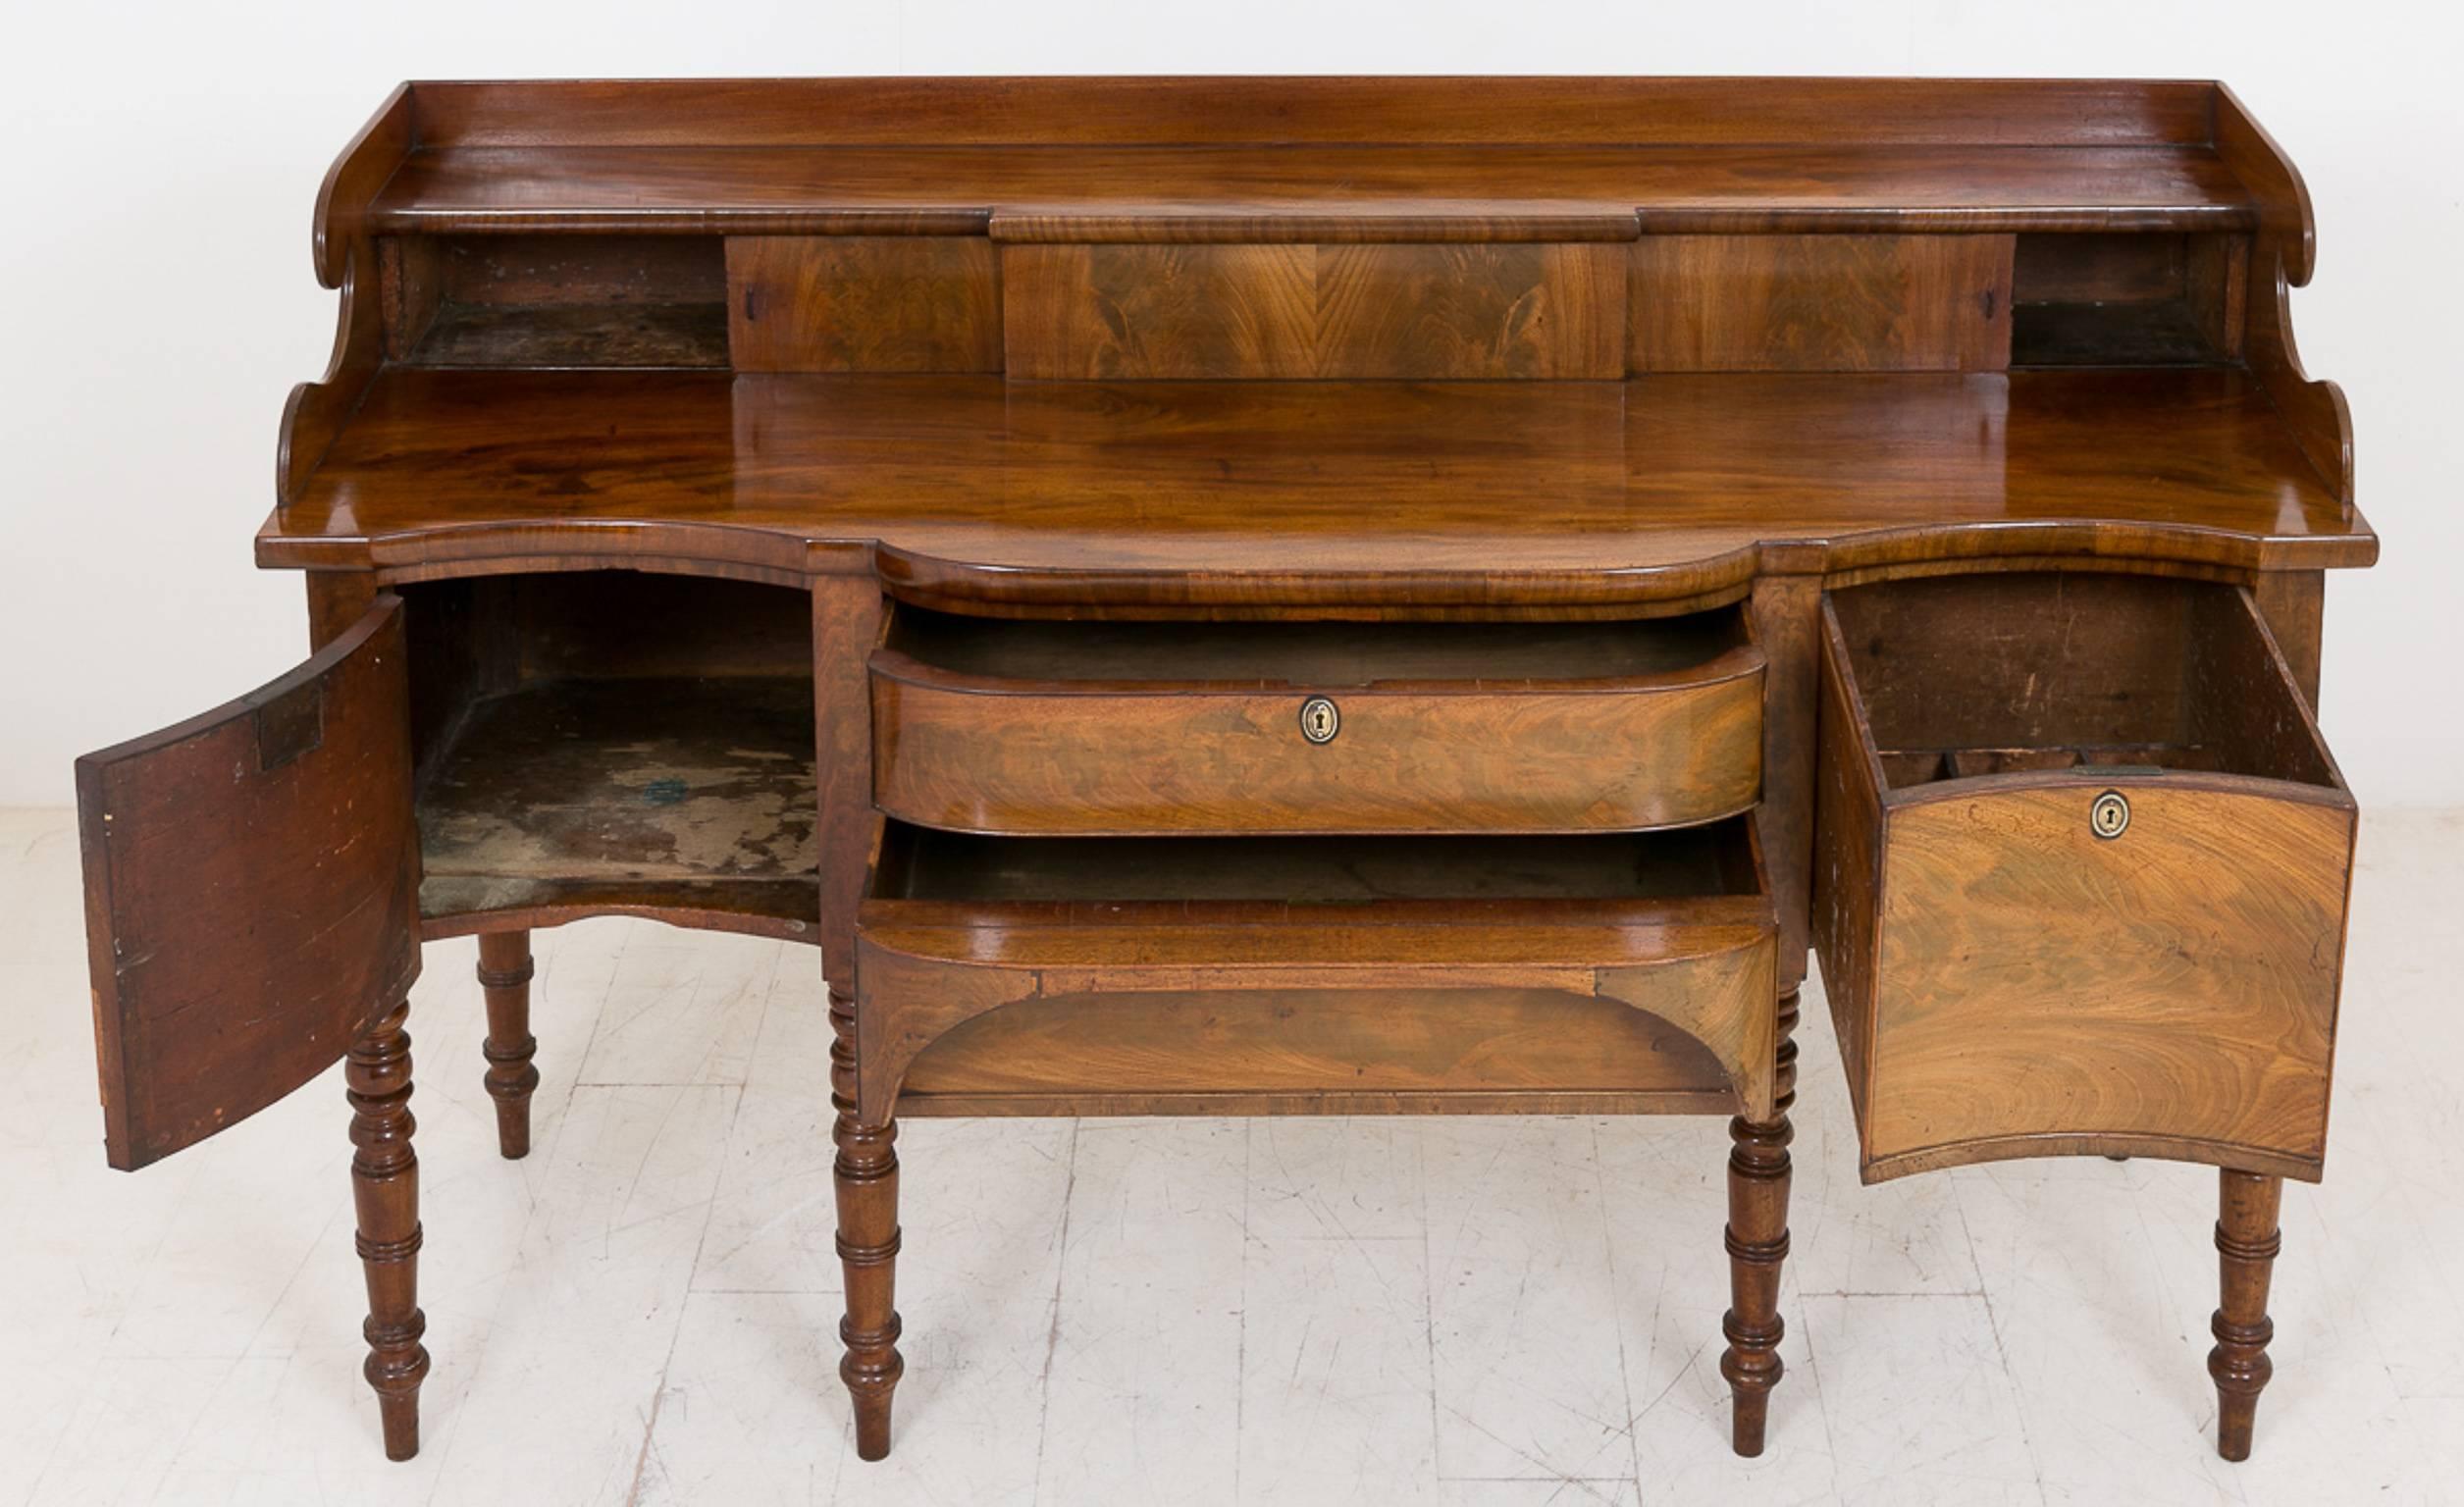 Regency Mahogany Sideboard of Serpentine Form In Good Condition For Sale In Norwich, Norfolk